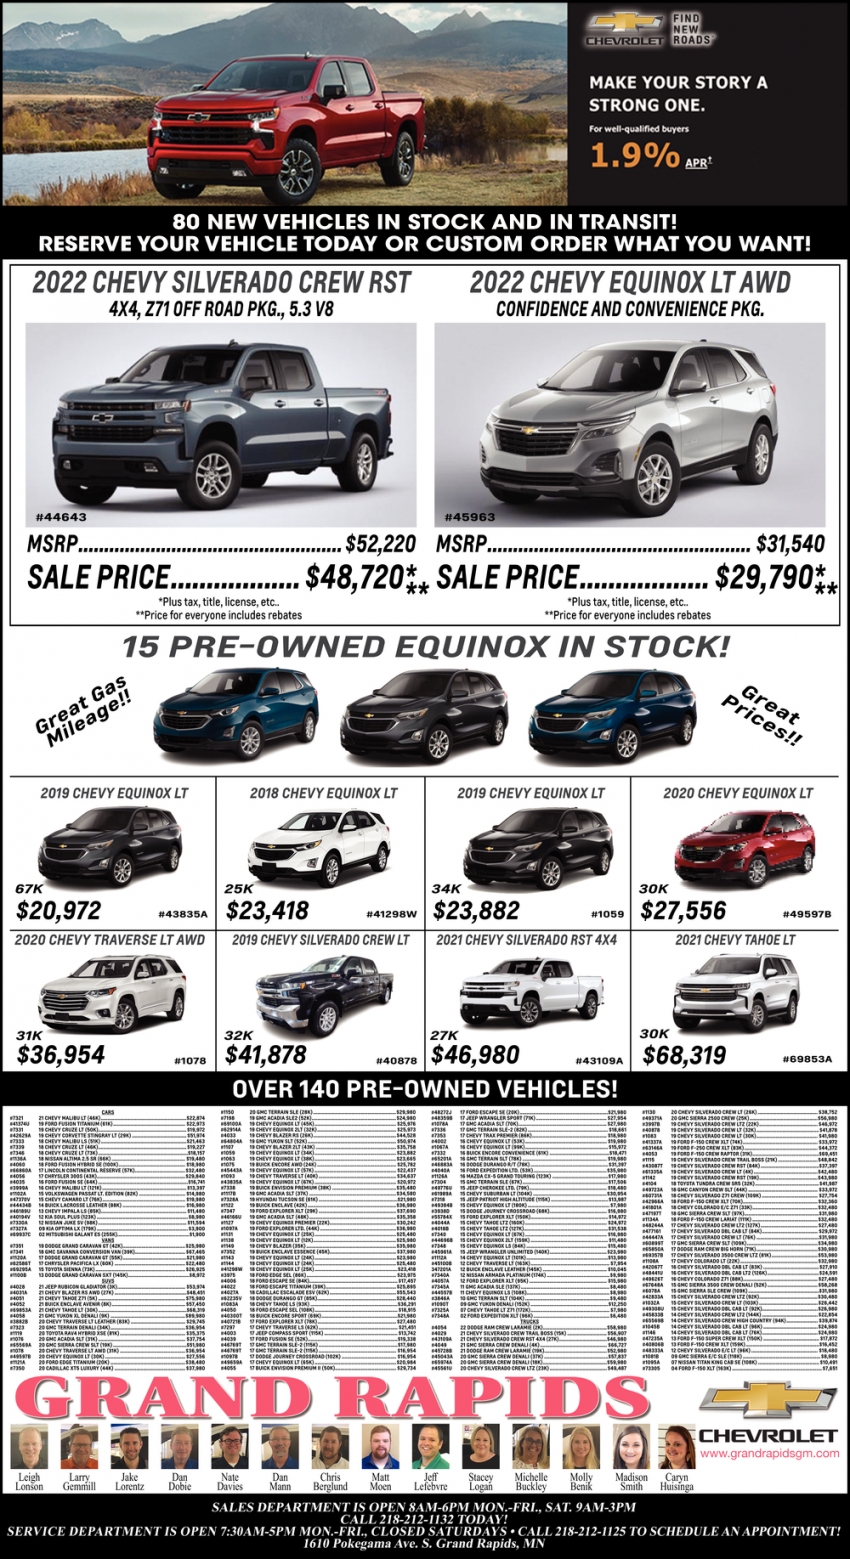 15 Pre-Owned Equinox In Stock!